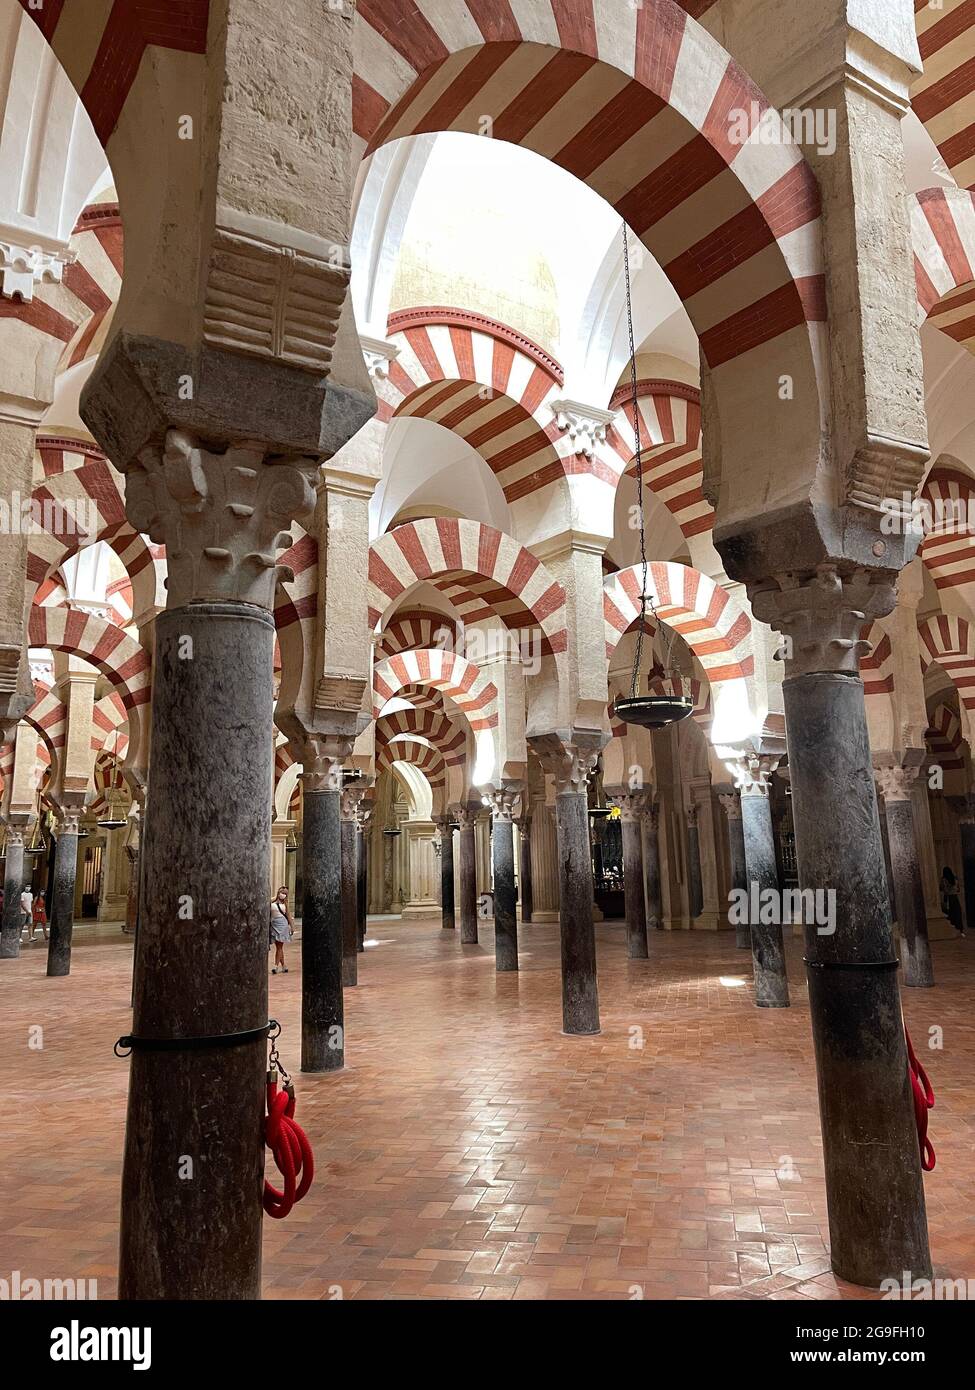 Arches and columns of the Cordoba mosque Stock Photo